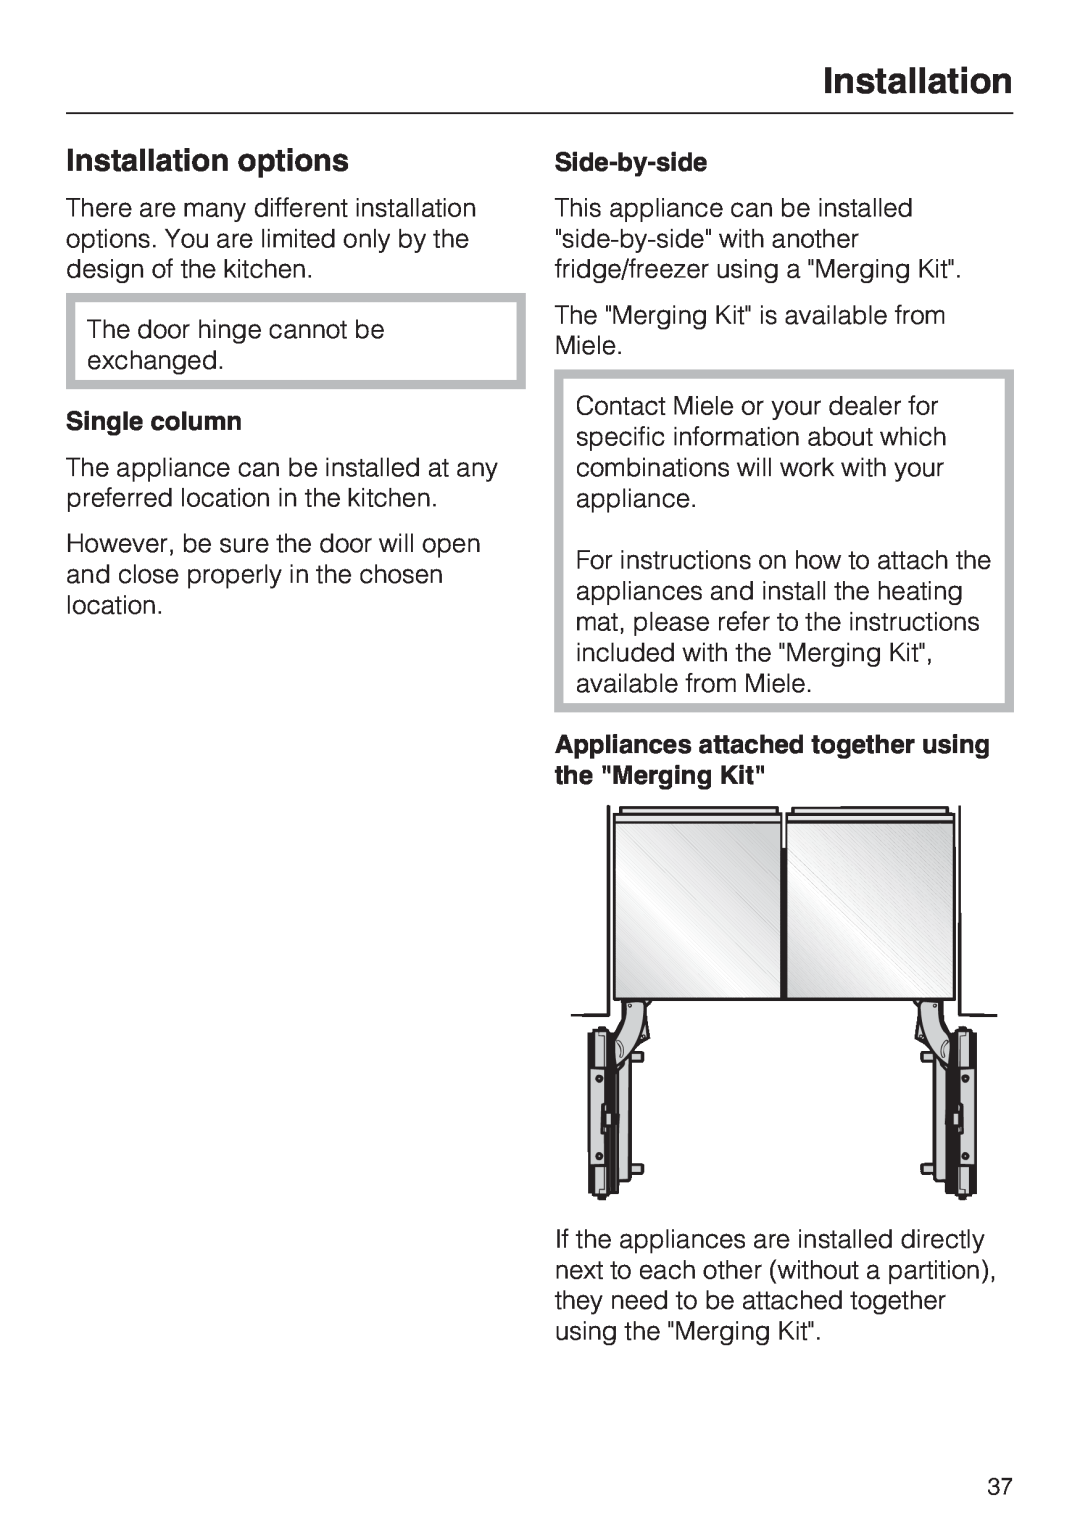 Miele KWT 1611 SF, KWT 1601 SF installation instructions Installation options, Single column, Side-by-side 